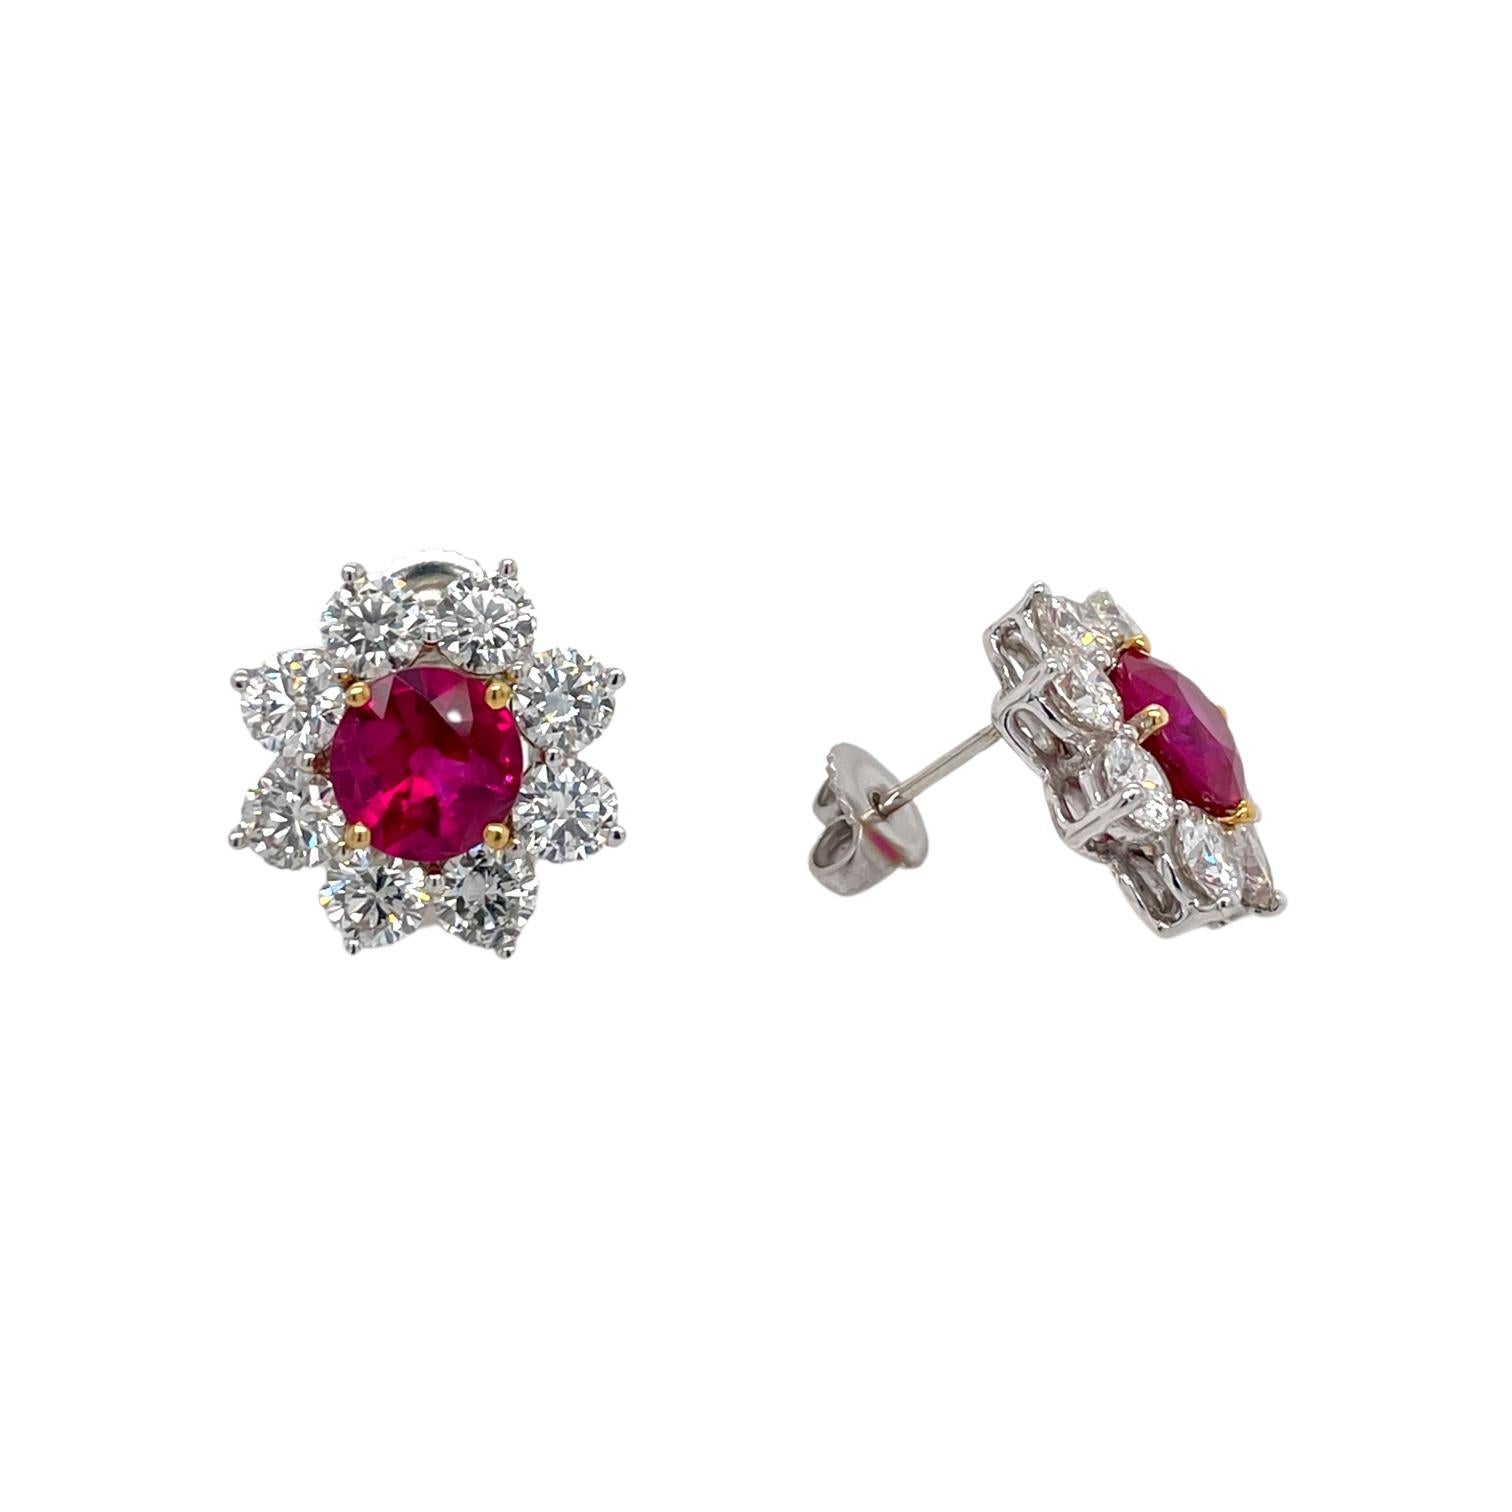 Earrings contain 2 round Burmese rubies, 2.89tcw and 16 round brilliant diamonds, 3.50tcw. Rubies are AGL certified and set in 18k yellow gold. Diamonds are colorless, VS in clarity, excellent cut and set in 18k white gold. All stones are mounted in